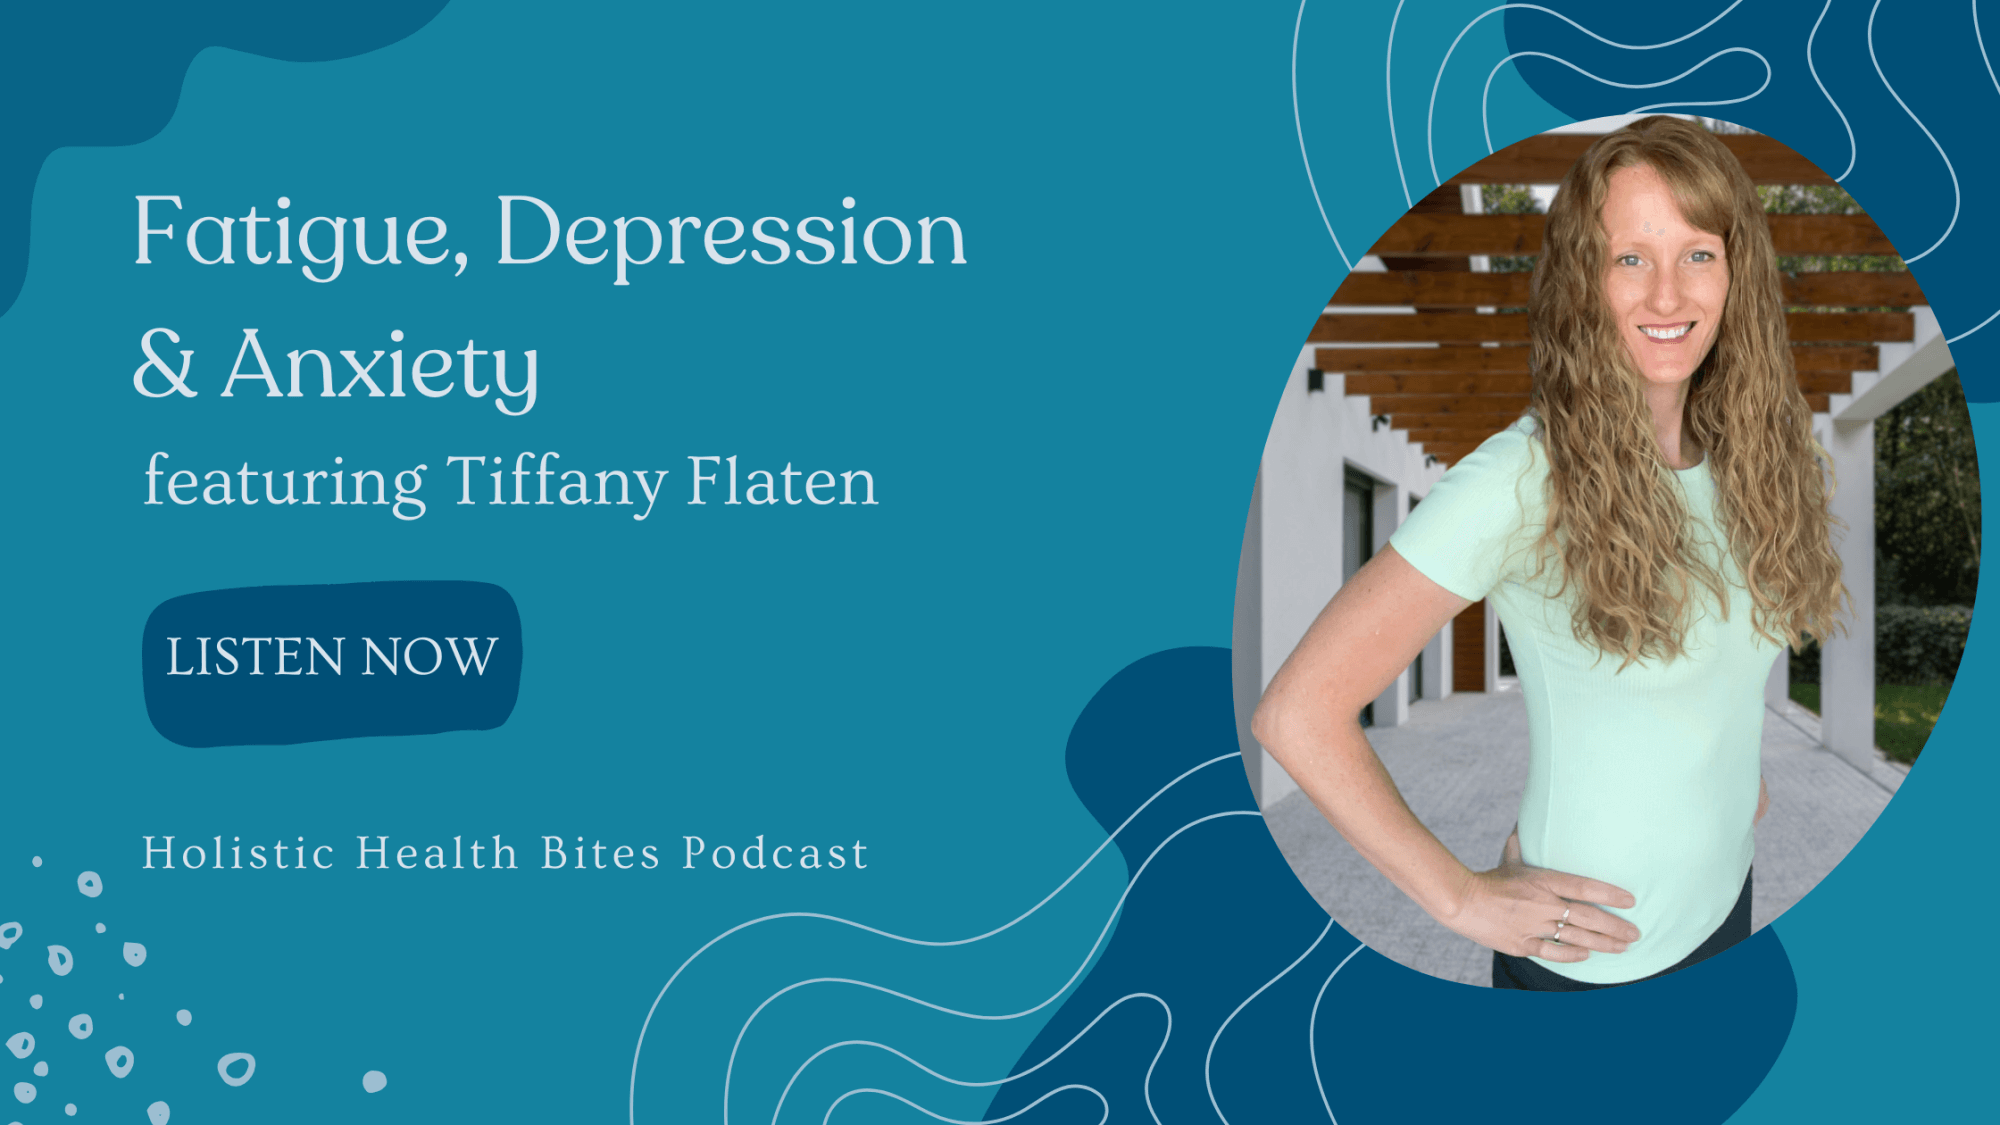 Fatigue, depression and anxiety with Tiffany Flaten by Functional Nutritionist Andrea Nicholson